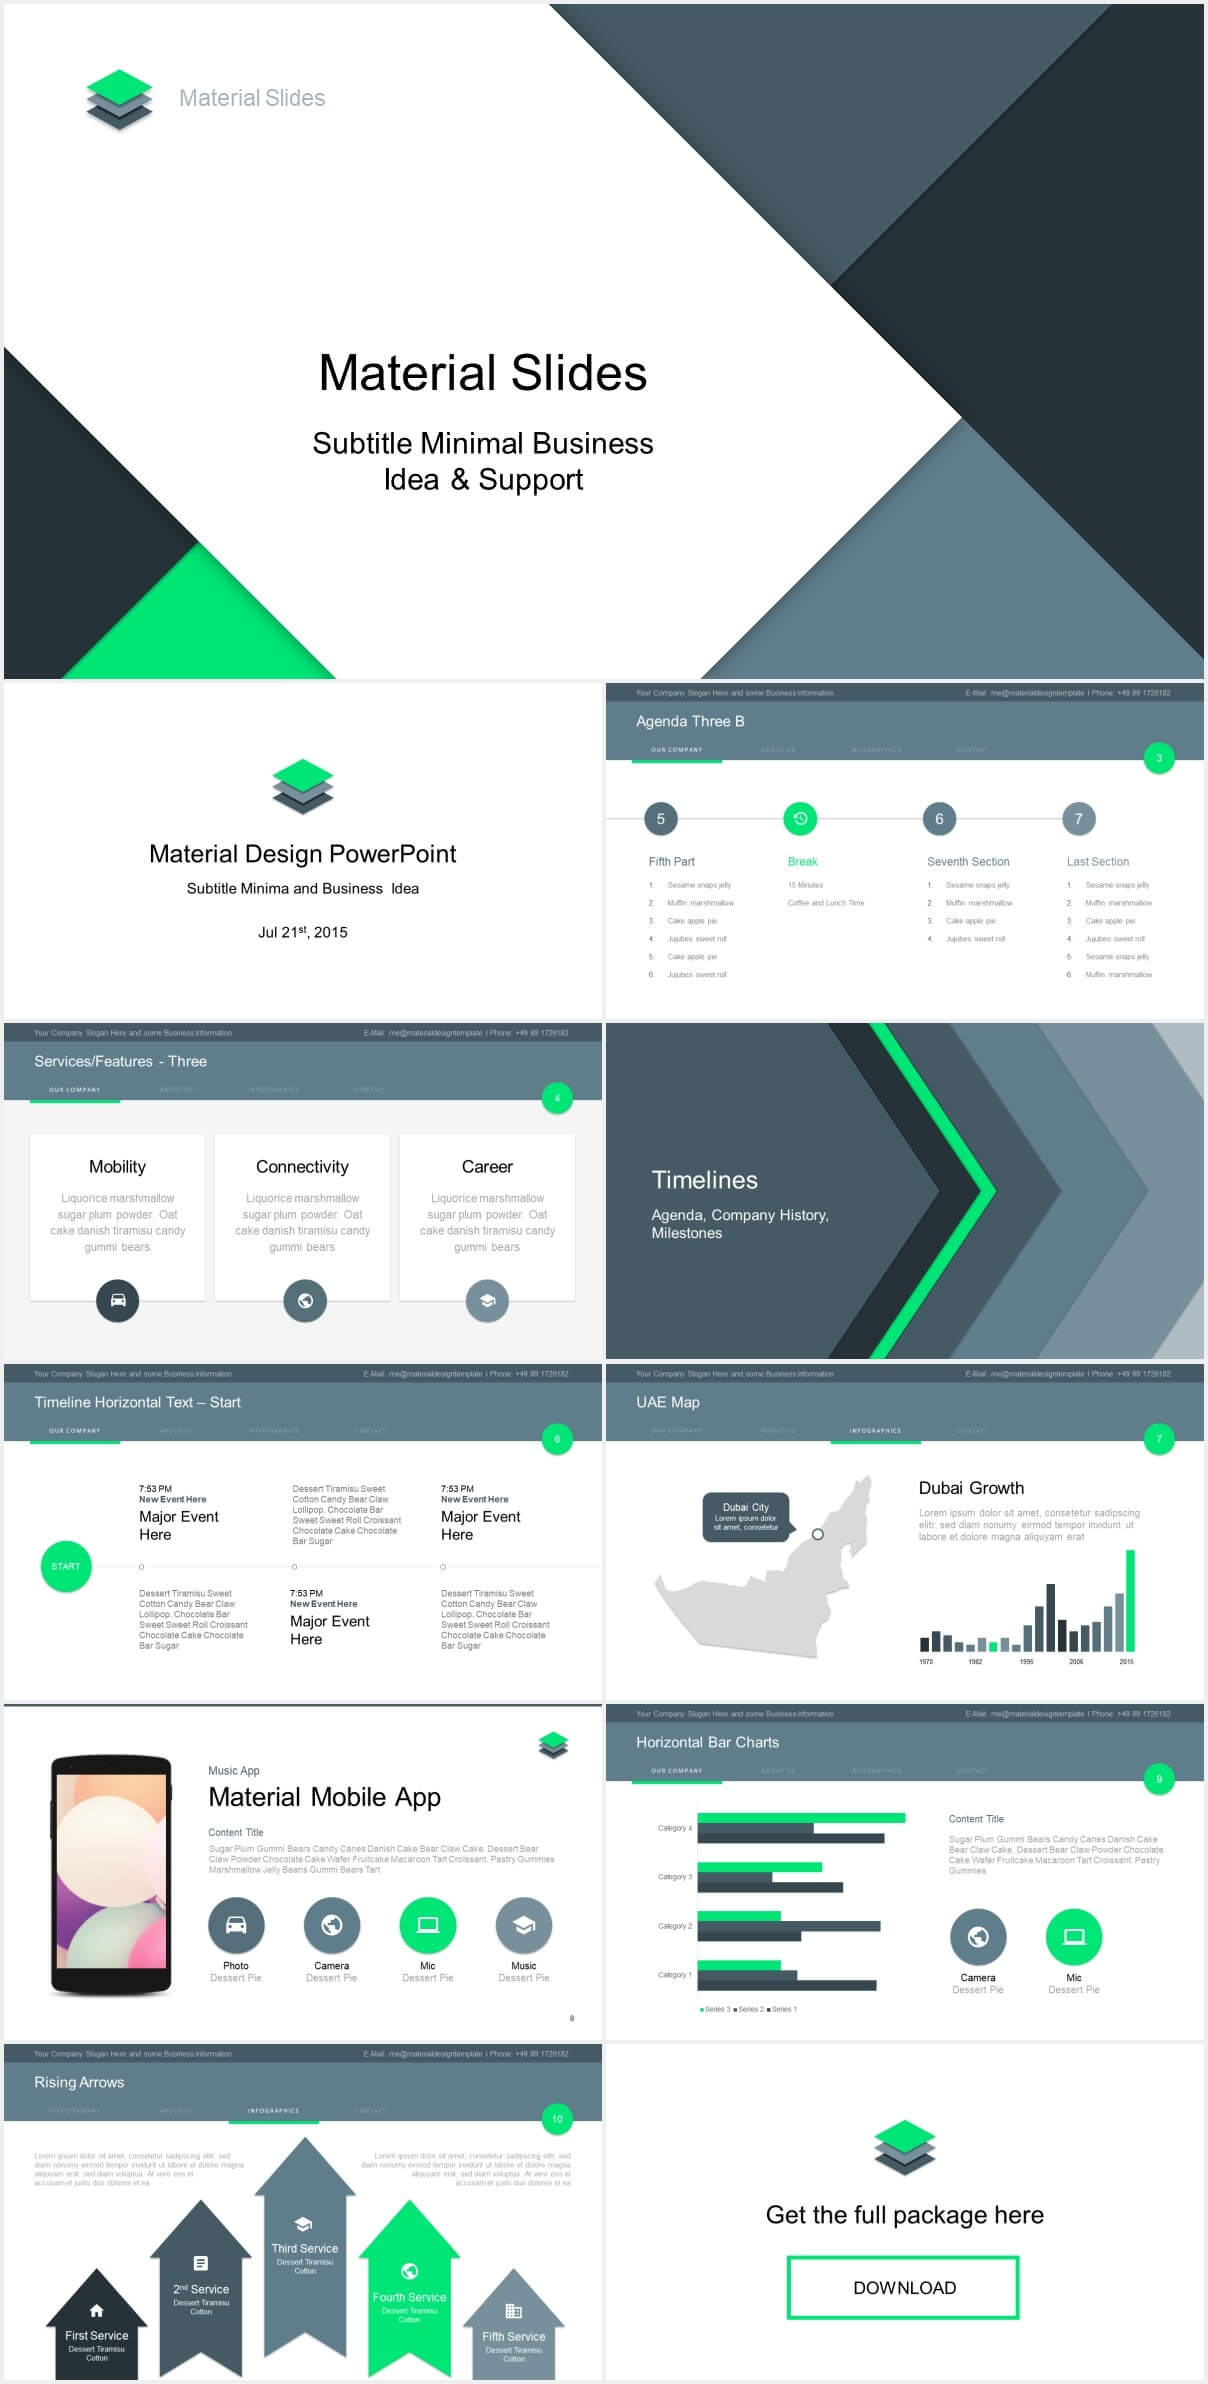 Material Design Powerpoint Template – Just Free Slides Throughout Powerpoint Slides Design Templates For Free